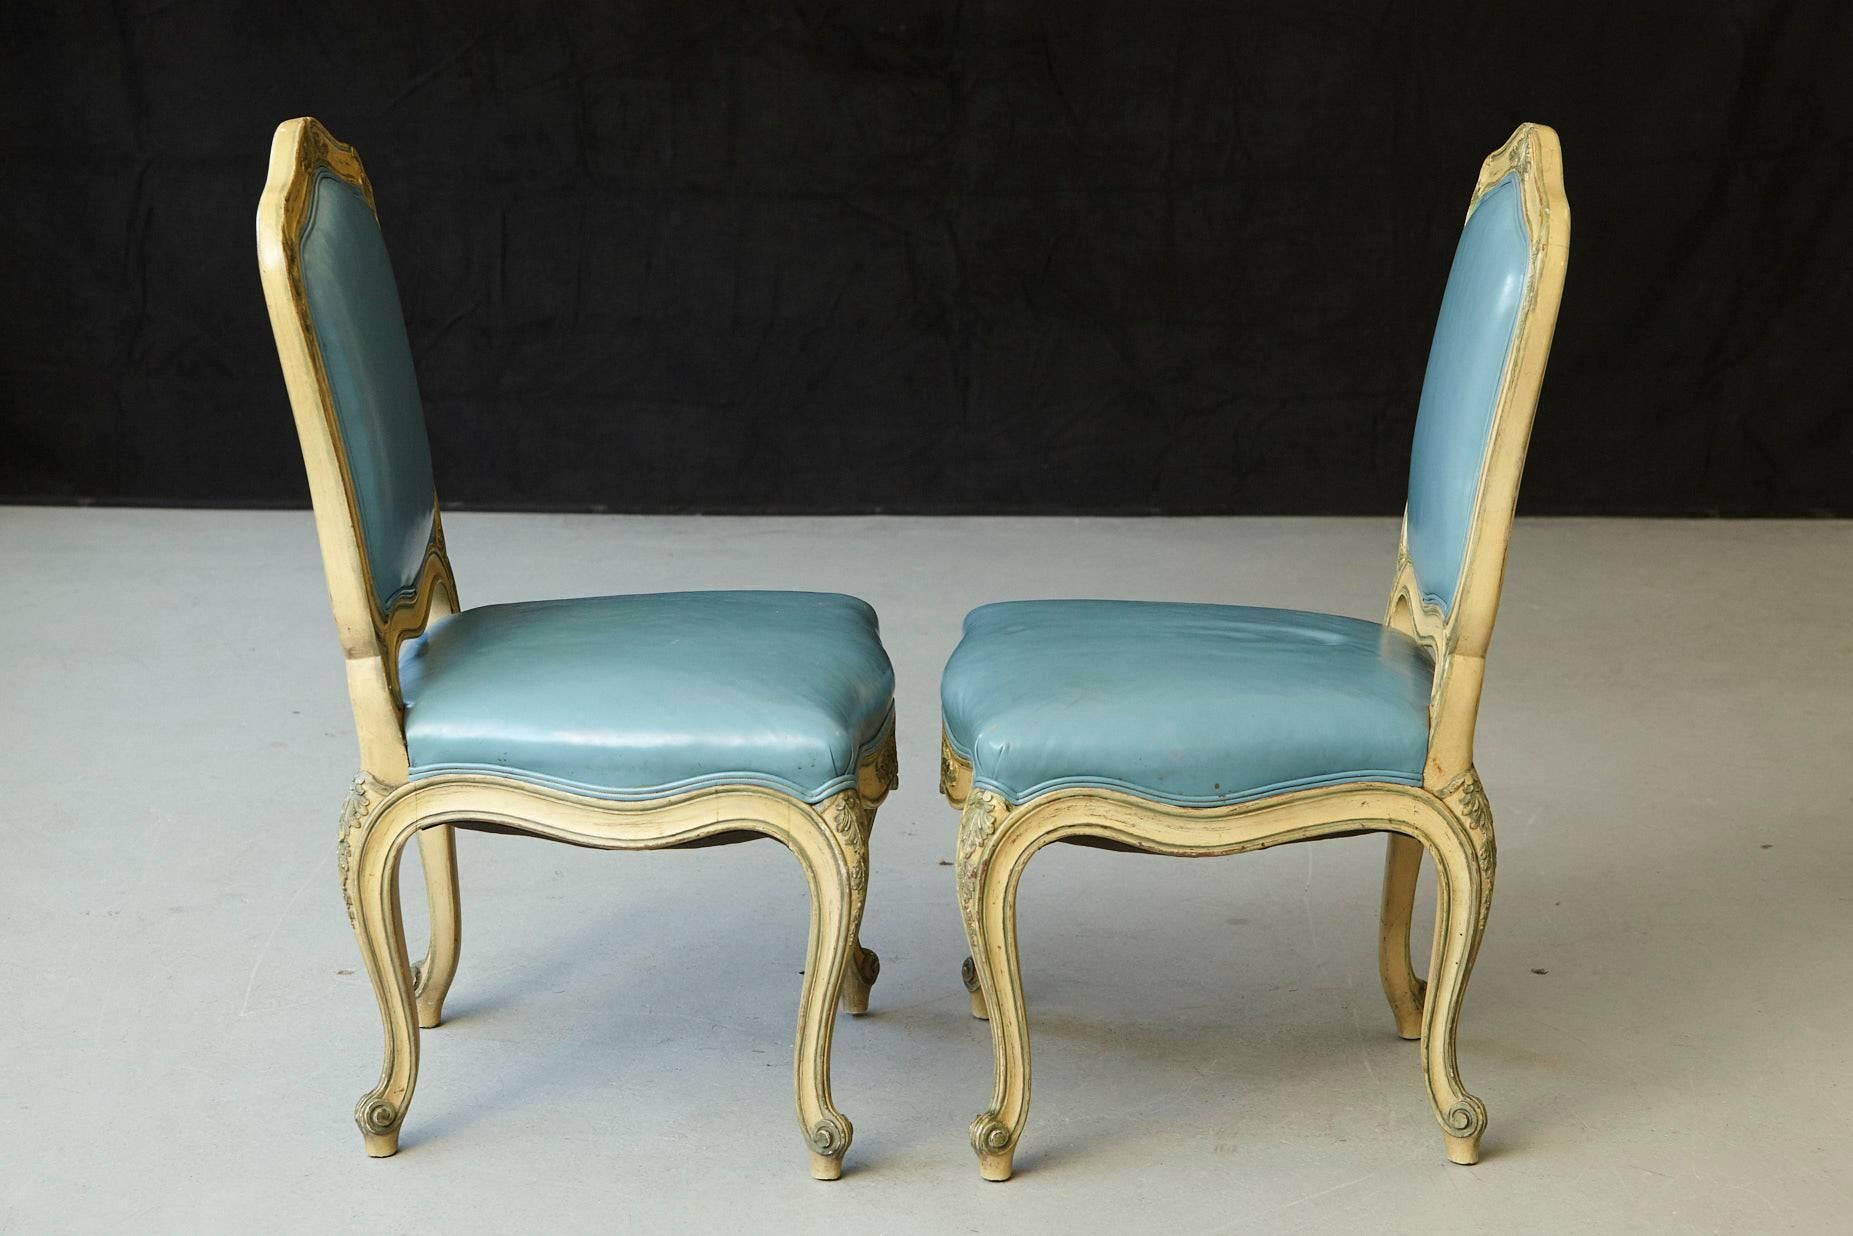 Mid-20th Century Pair of French Louis XV Style Side Chairs Upholstered in Powder Blue Leather For Sale